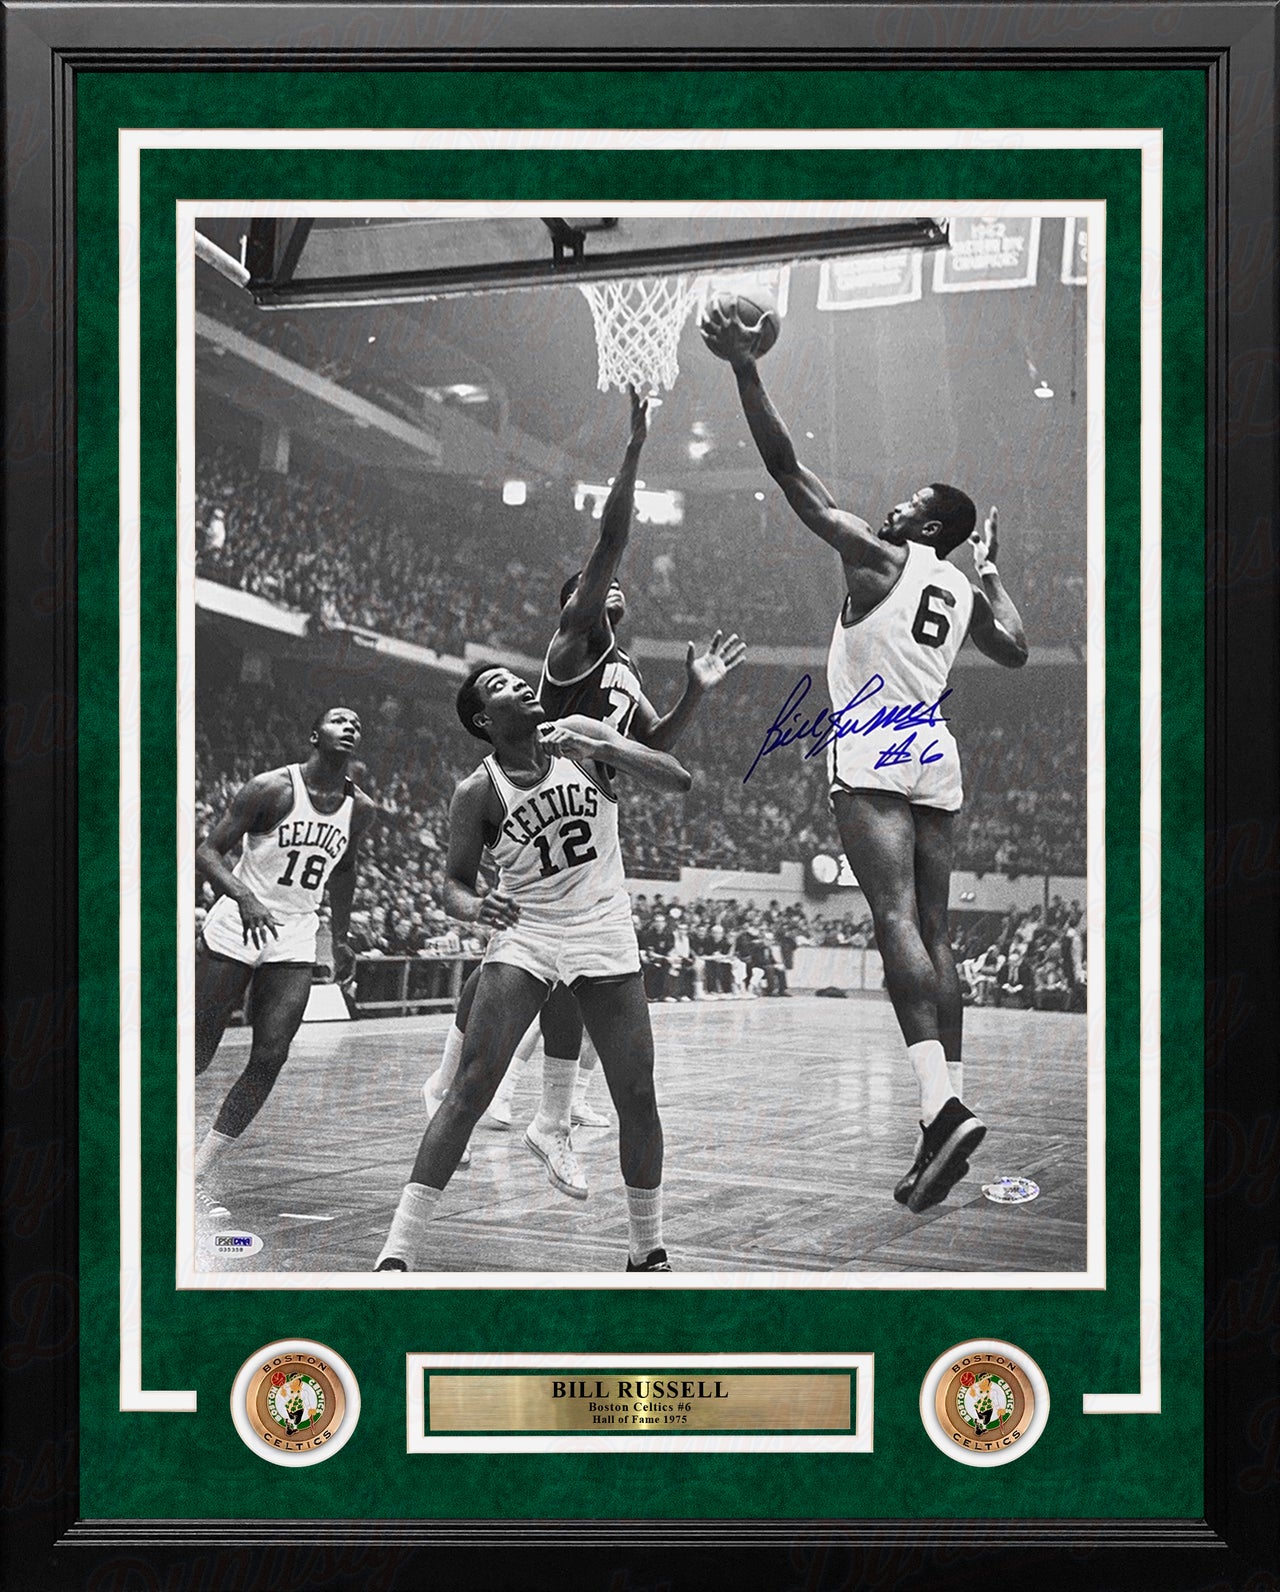 Bill Russell Making a Layup Boston Celtics Autographed 16" x 20" Framed Basketball Photo - Dynasty Sports & Framing 